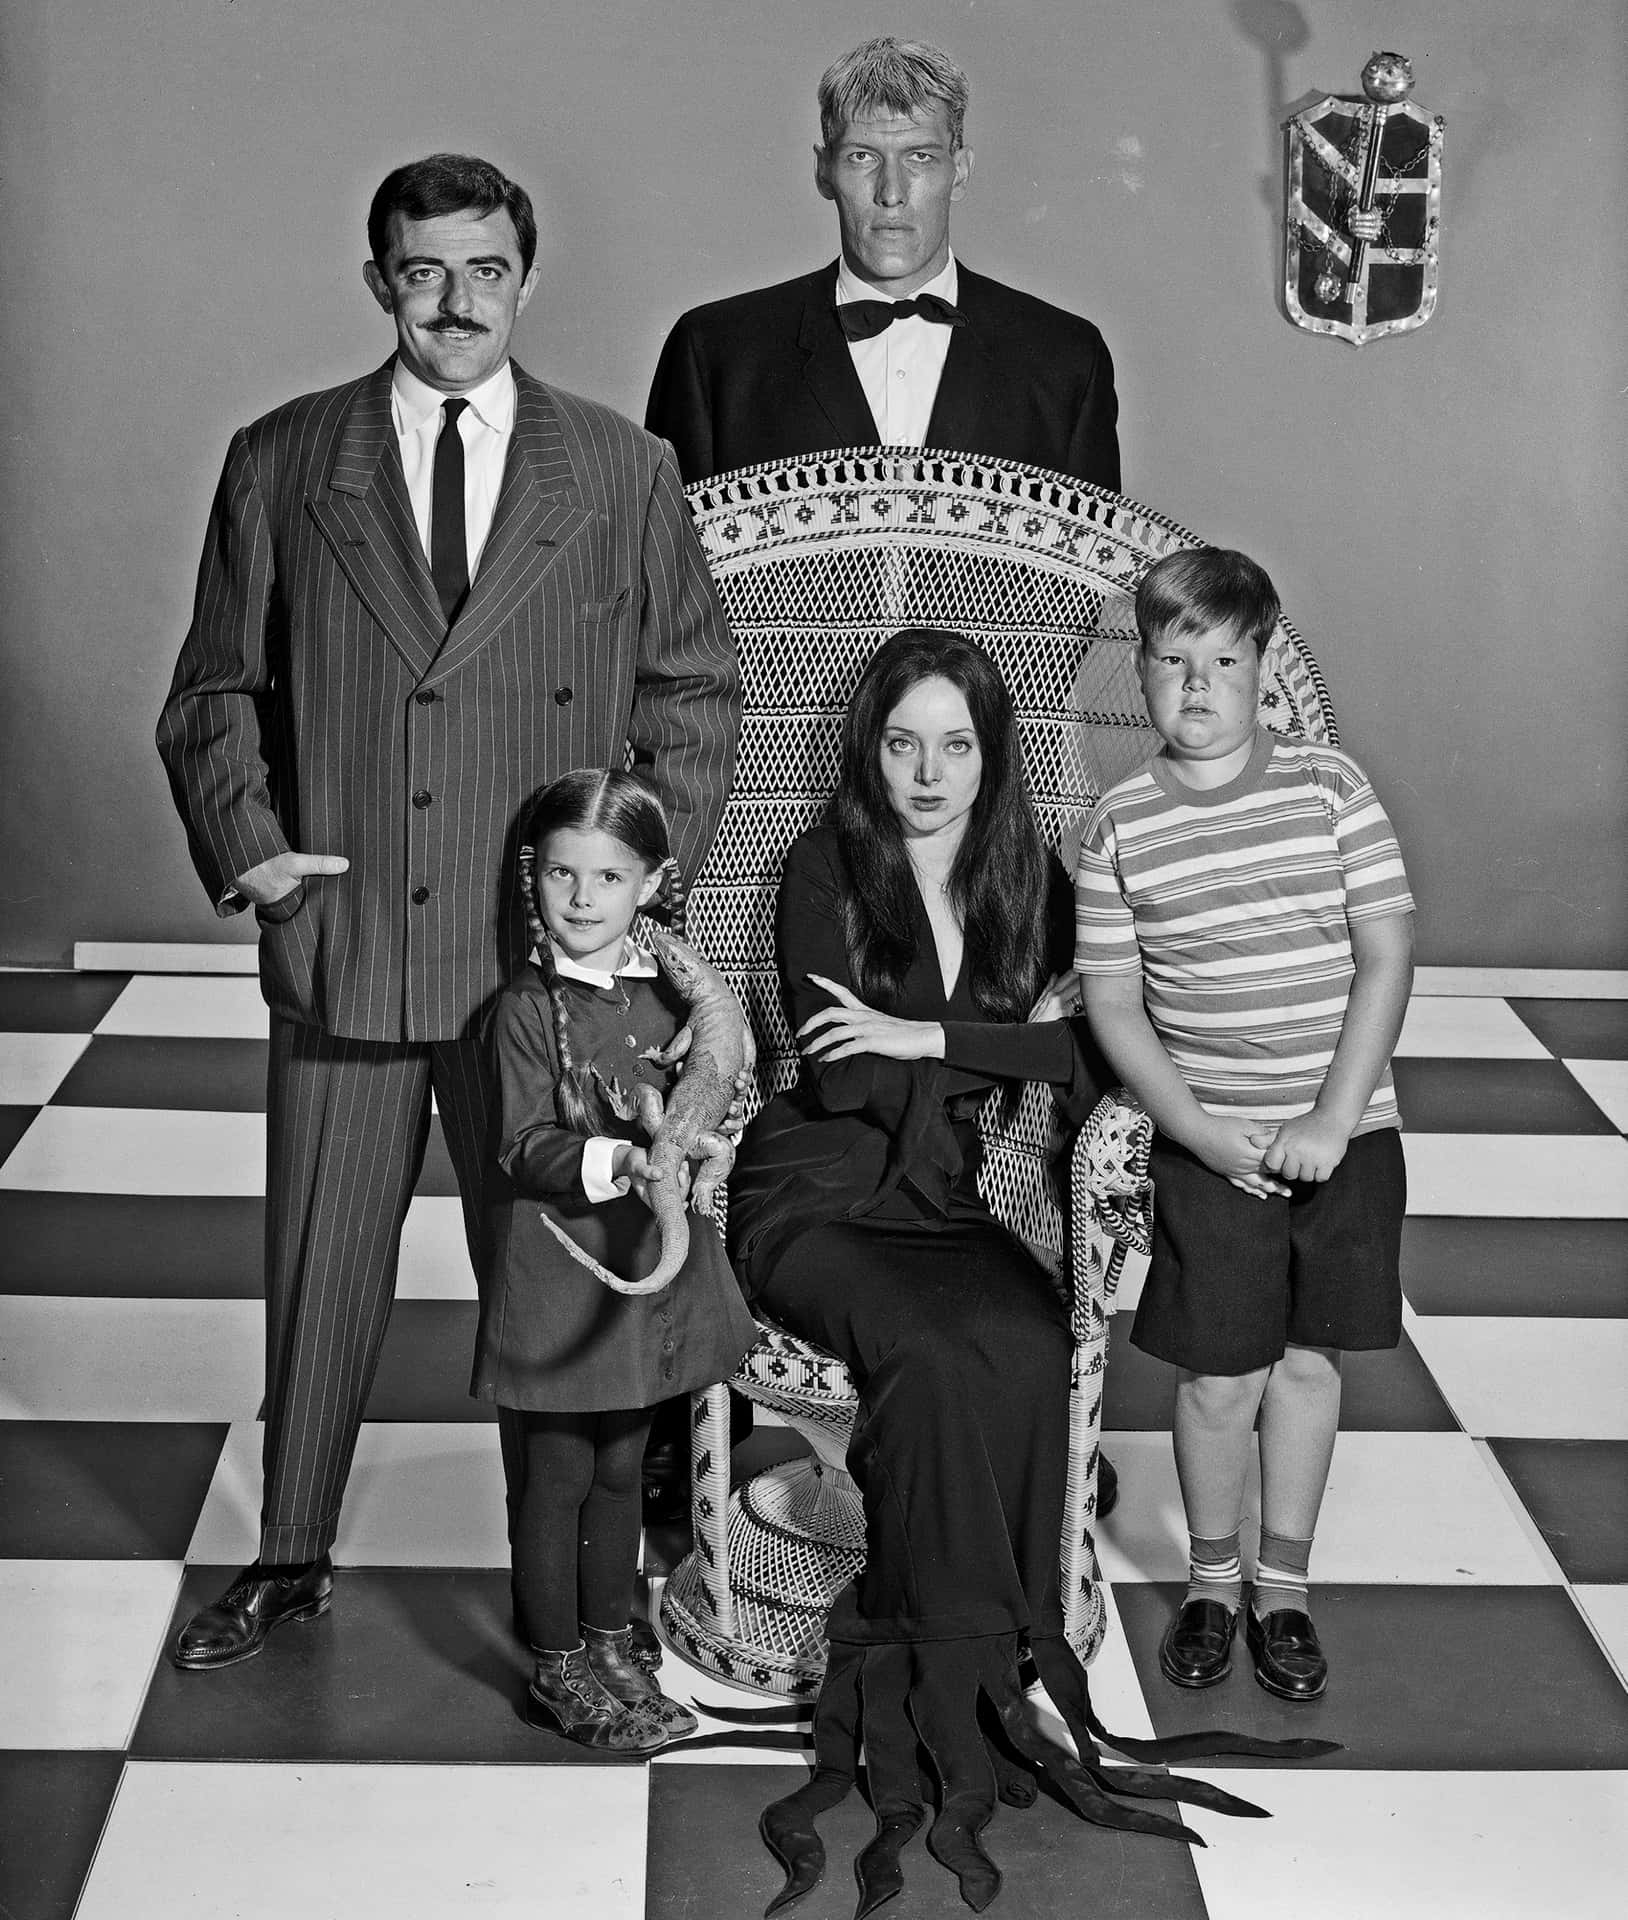 "The Addams Family - Lurch, Gomez, Morticia, Wednesday and Pugsley"